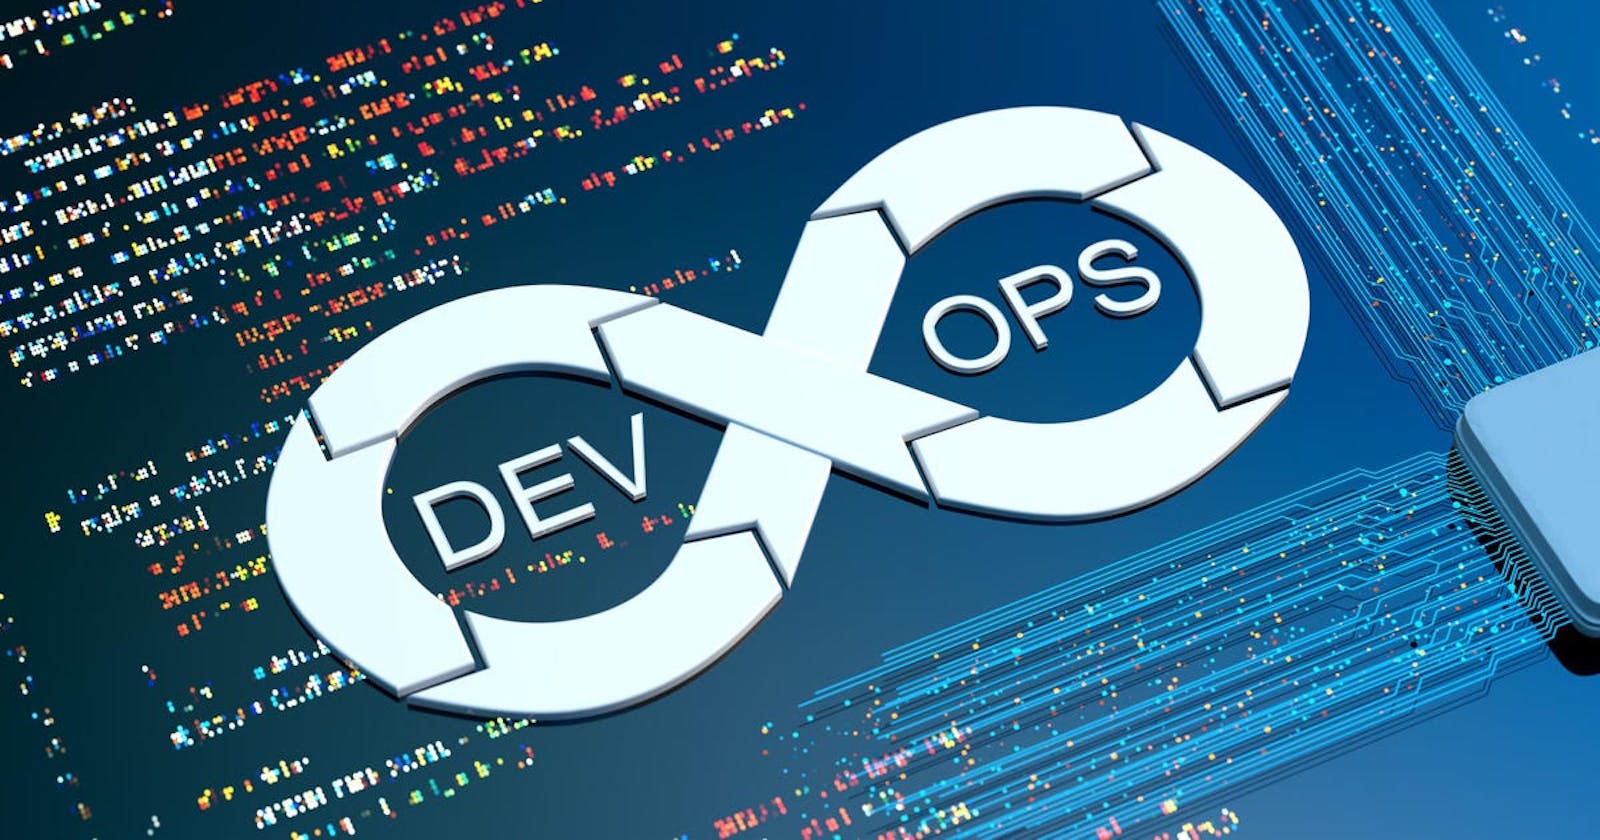 Getting Started with DevOps